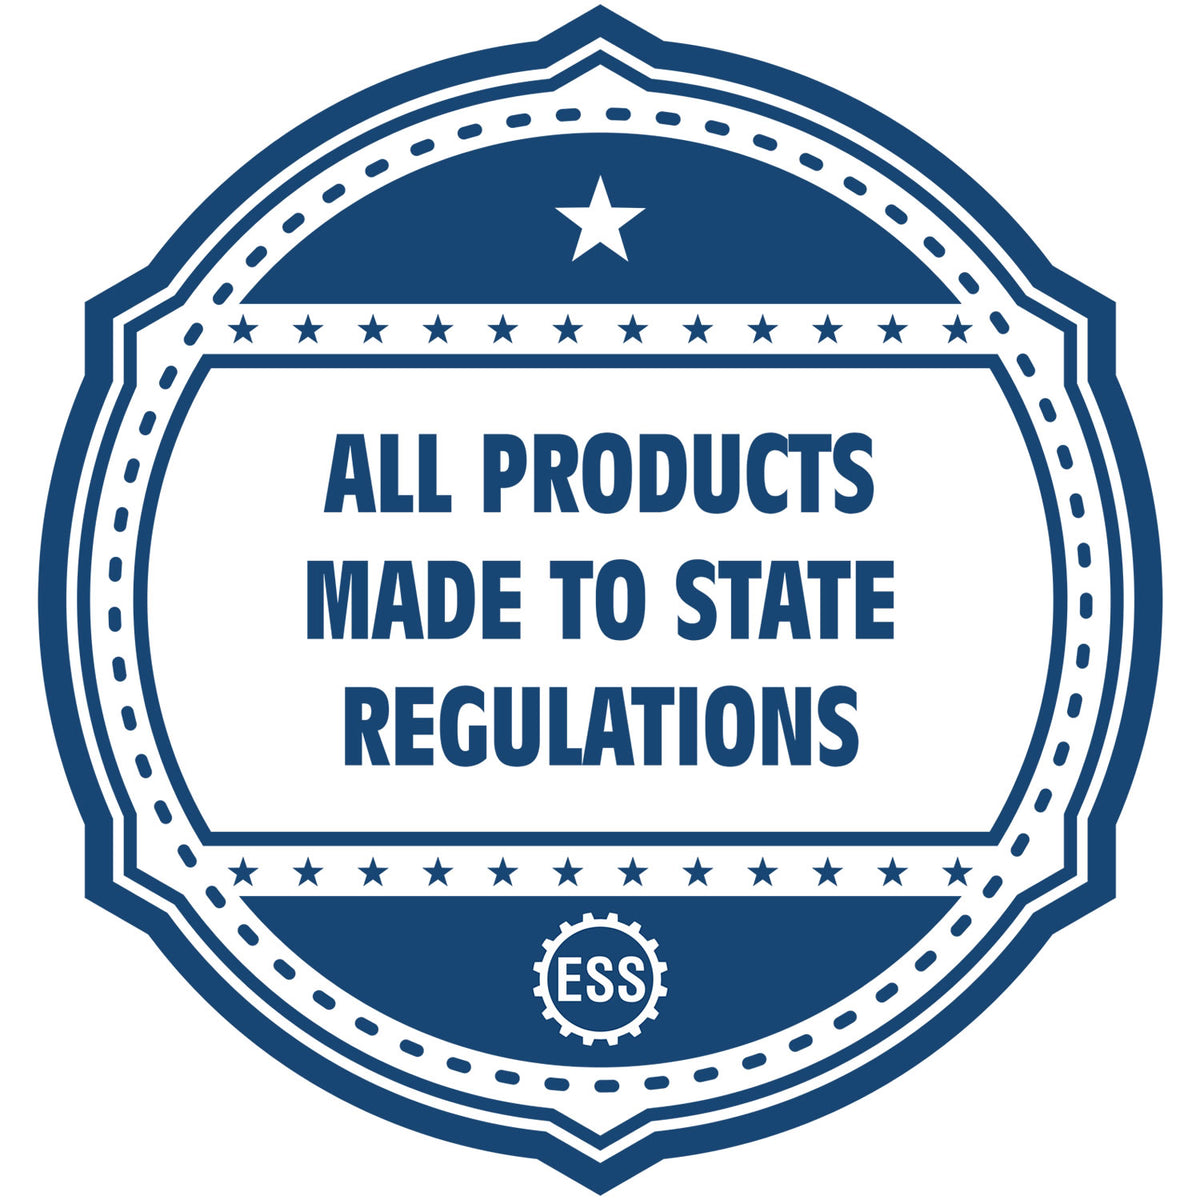 An icon or badge element for the Self-Inking Maine PE Stamp showing that this product is made in compliance with state regulations.